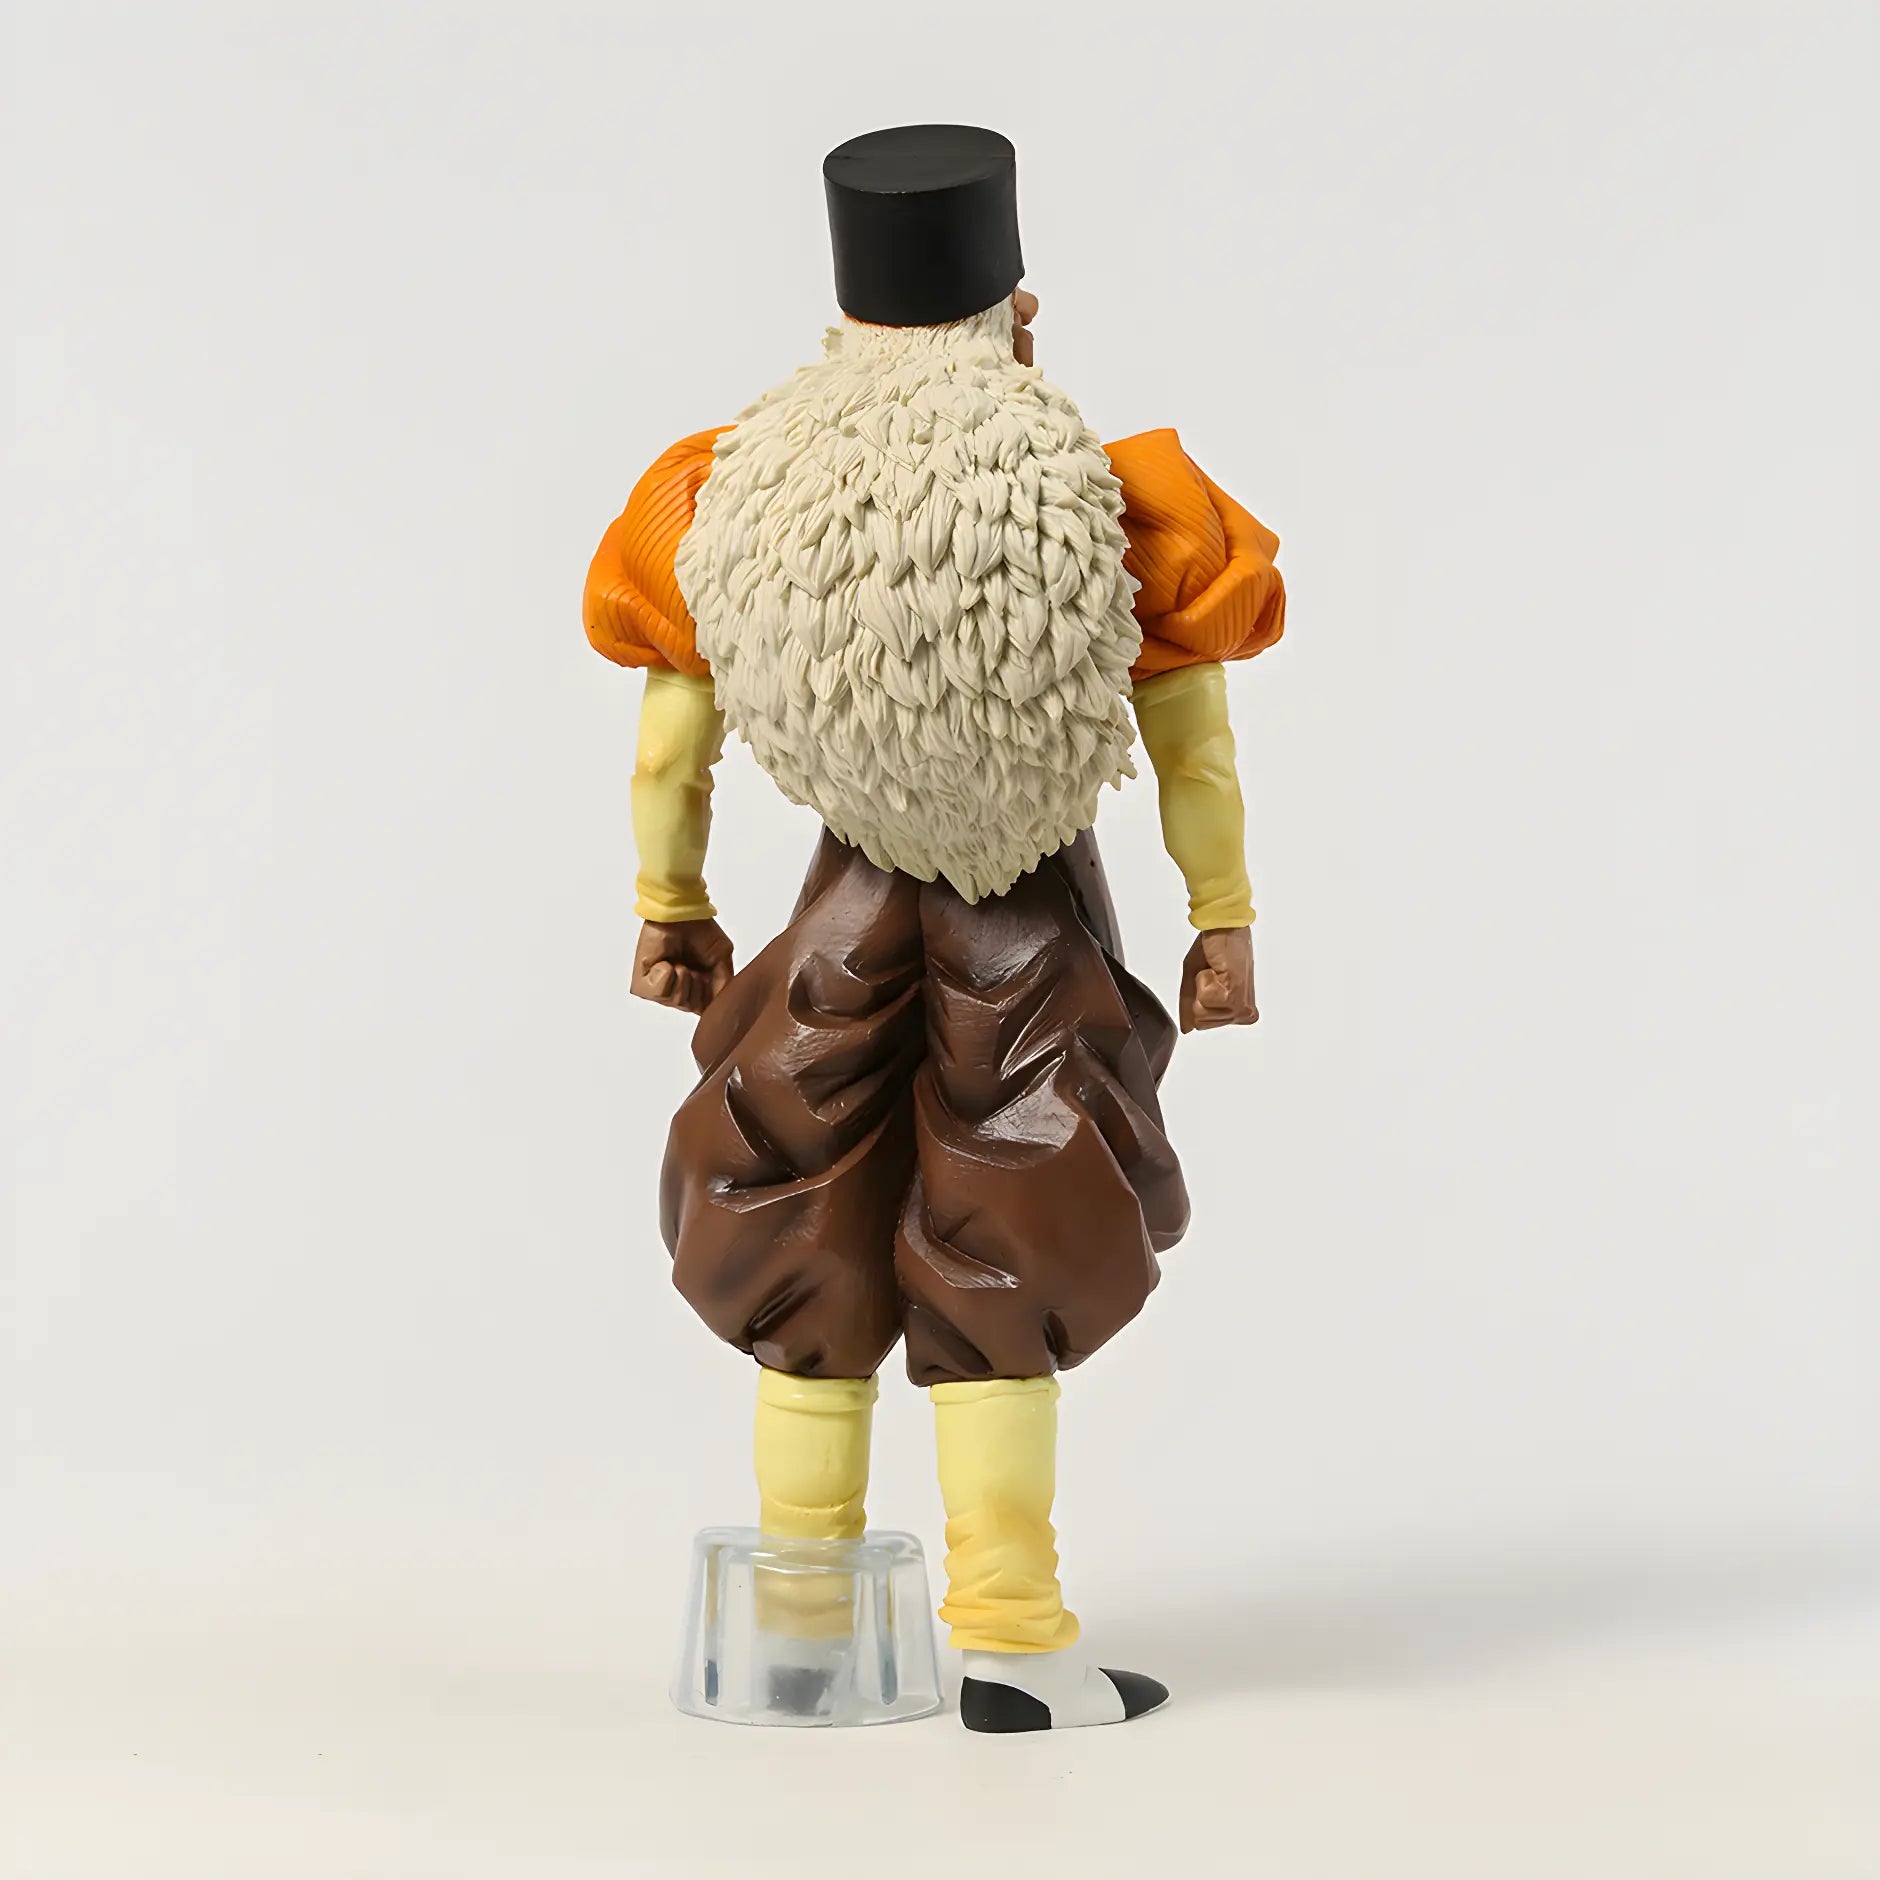 The back view of the Android 20 Dragon Ball figure, focusing on his flowing white hair and brown overalls with the Red Ribbon Army cap.